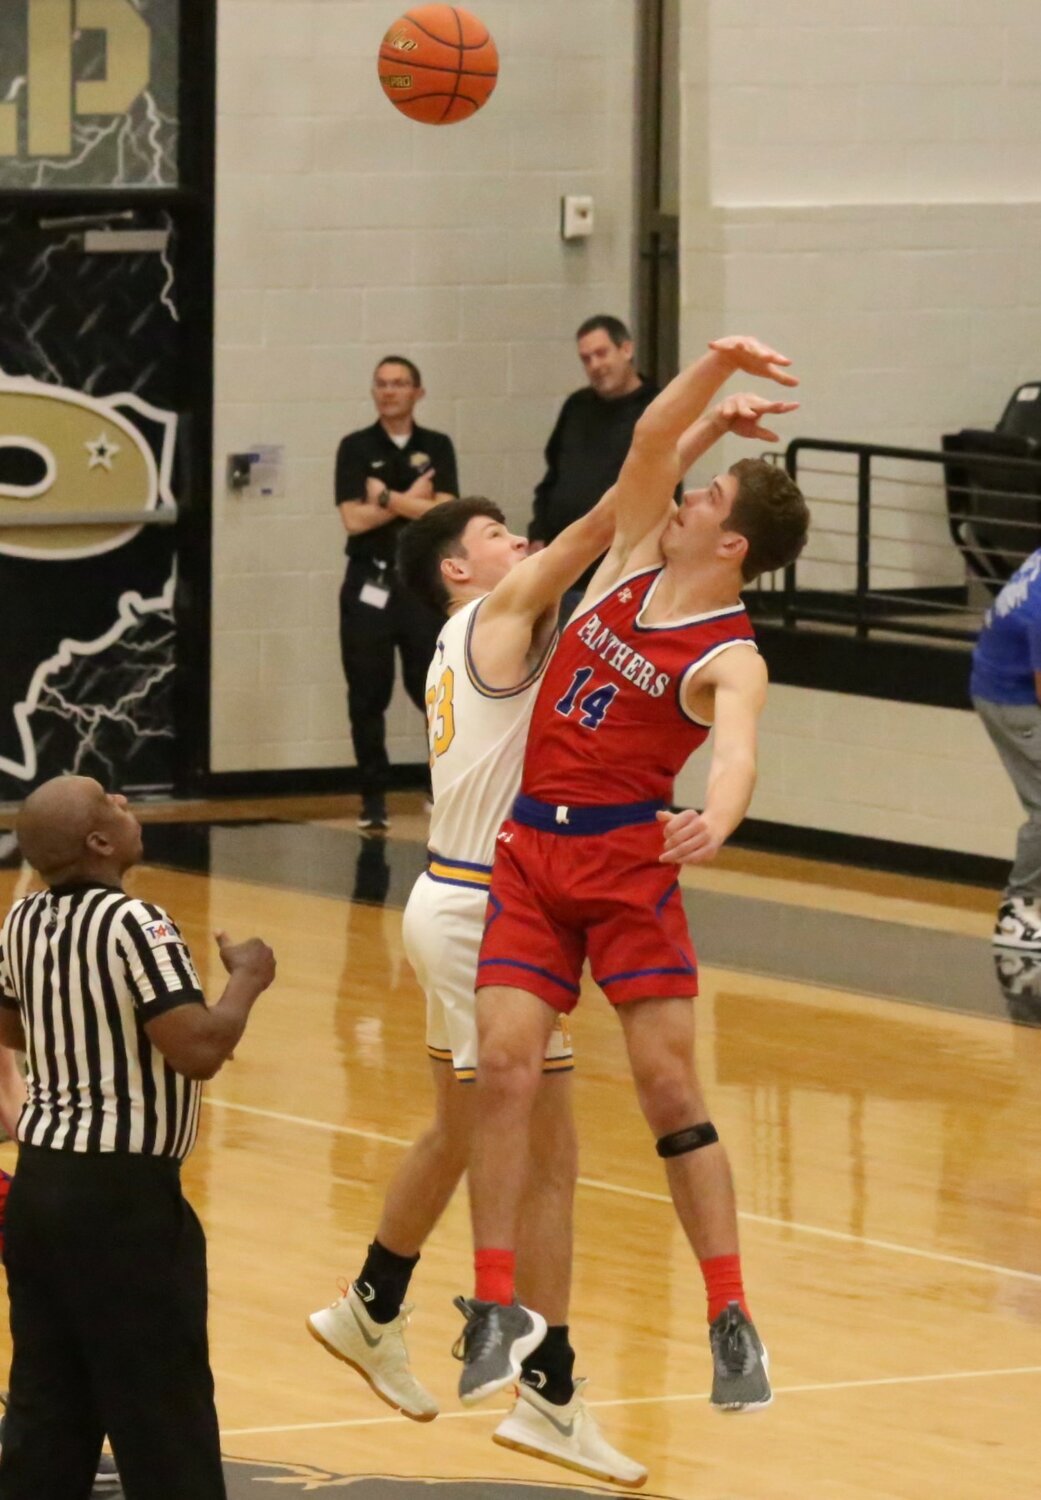 Payton Dickinson had a career night pouring in 30 points in the bi-district win over James Bowie.